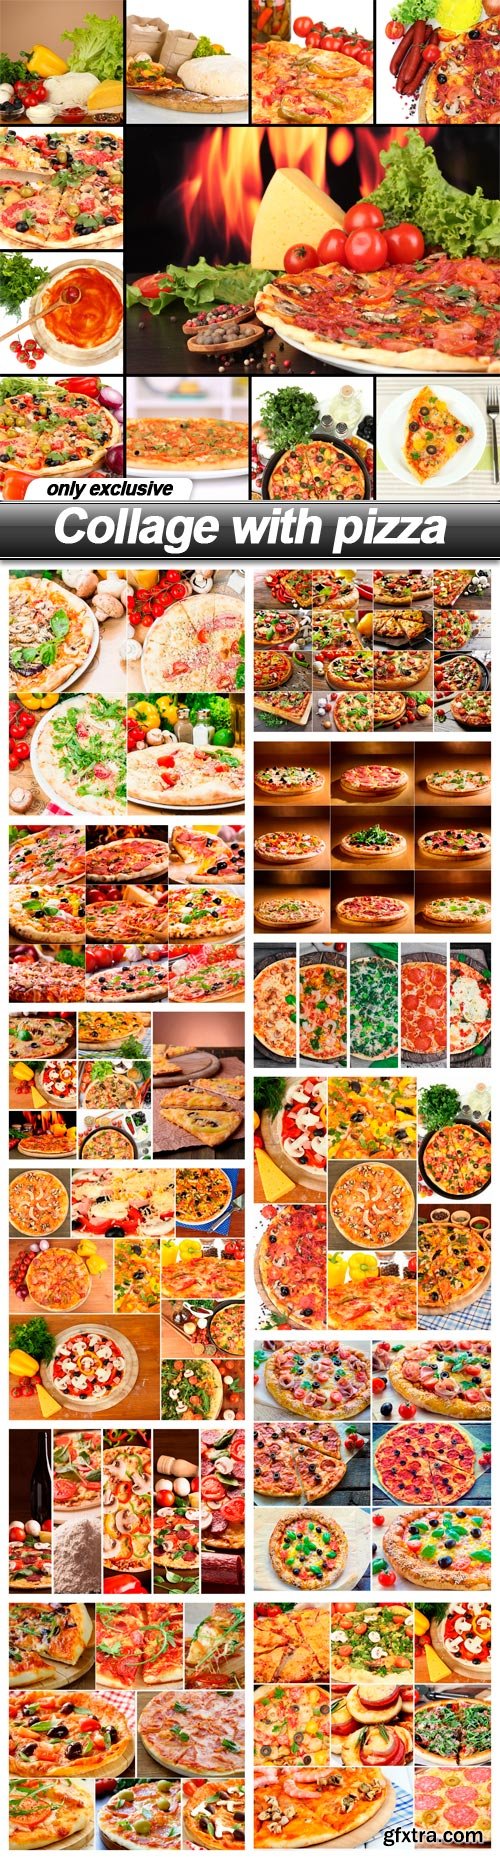 Collage with pizza - 13 UHQ JPEG